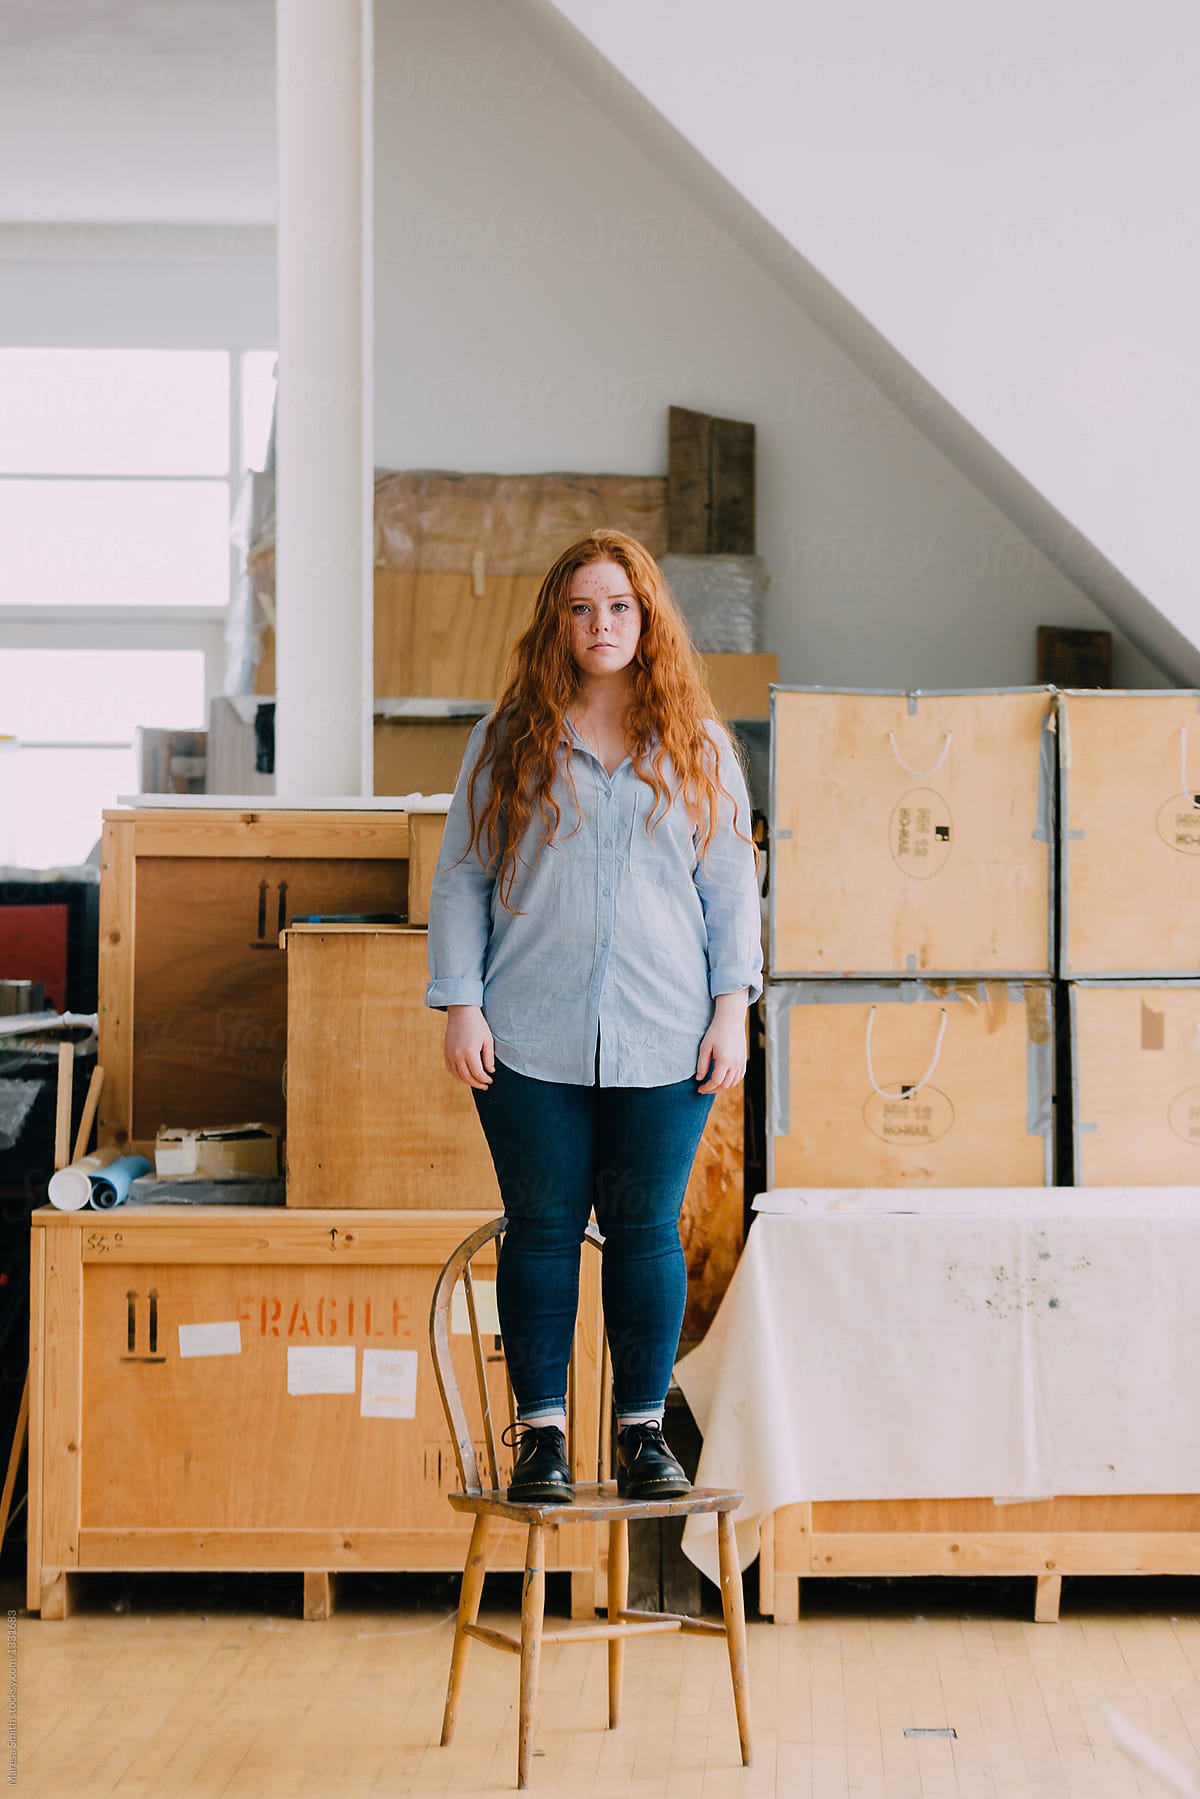 A teenage girl with ginger hair standing on a chair in a studio space surrounded by wooden boxes